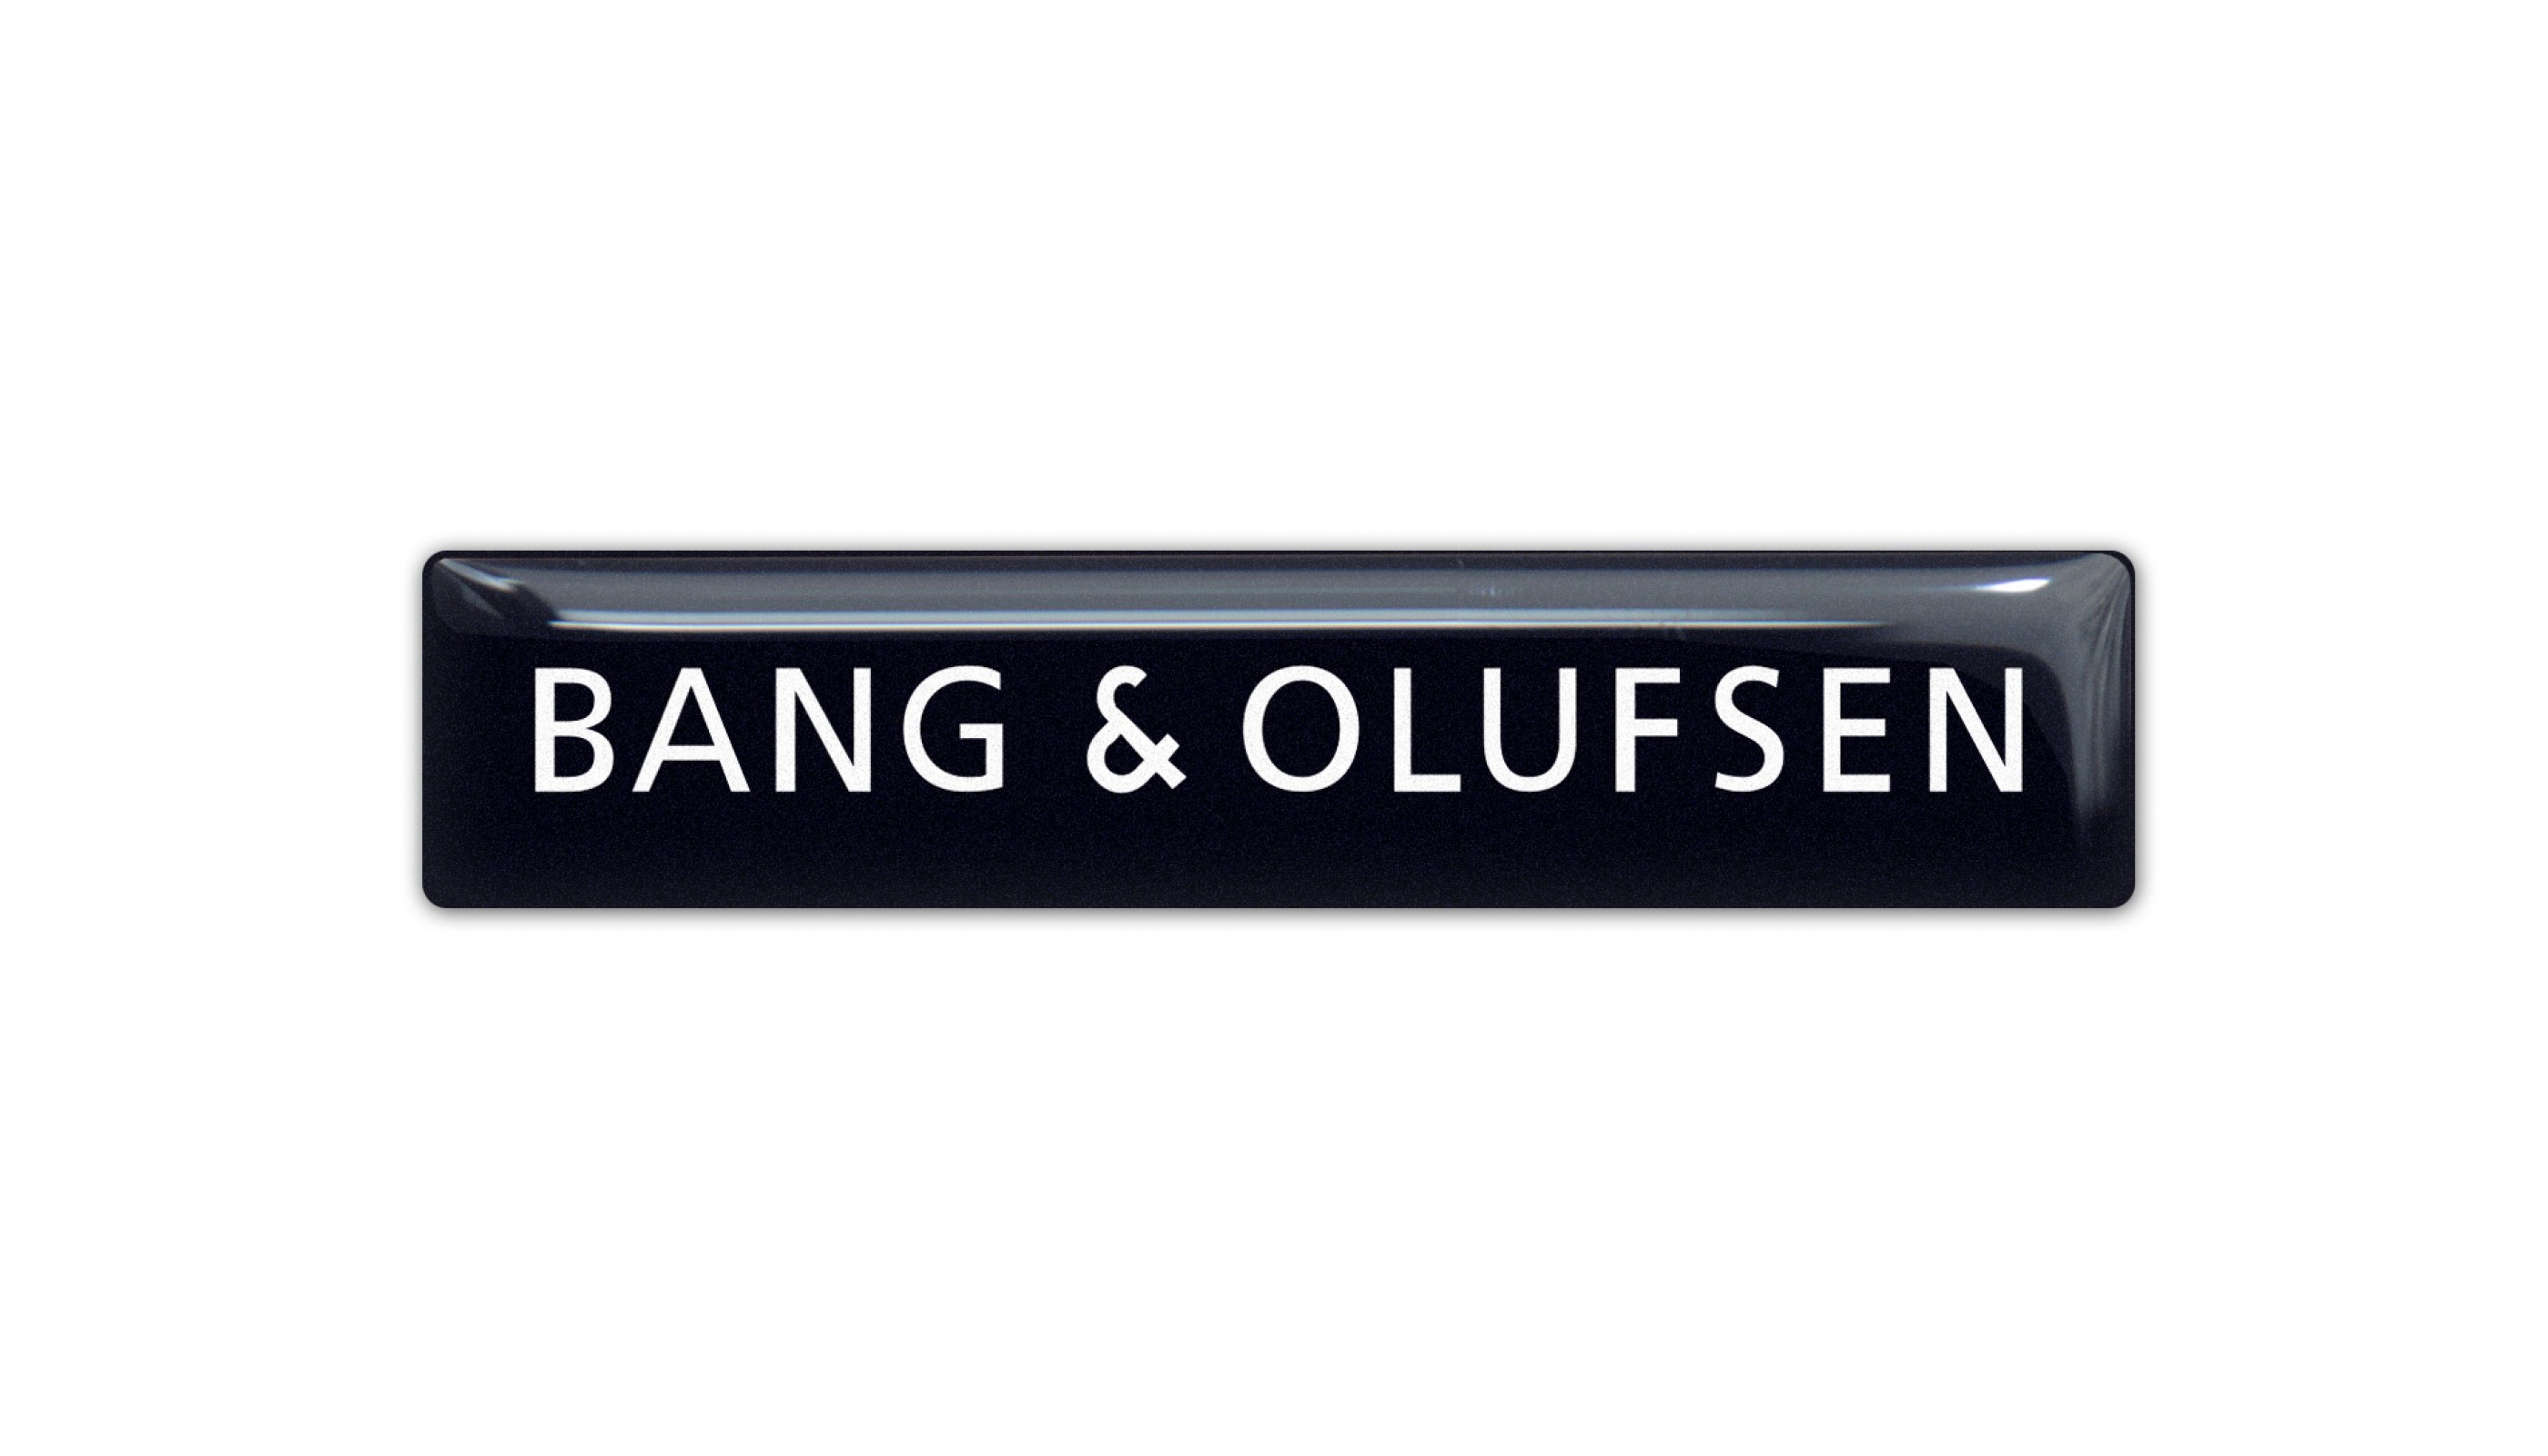 bang and olufsen sticker - www.learningelf.com.